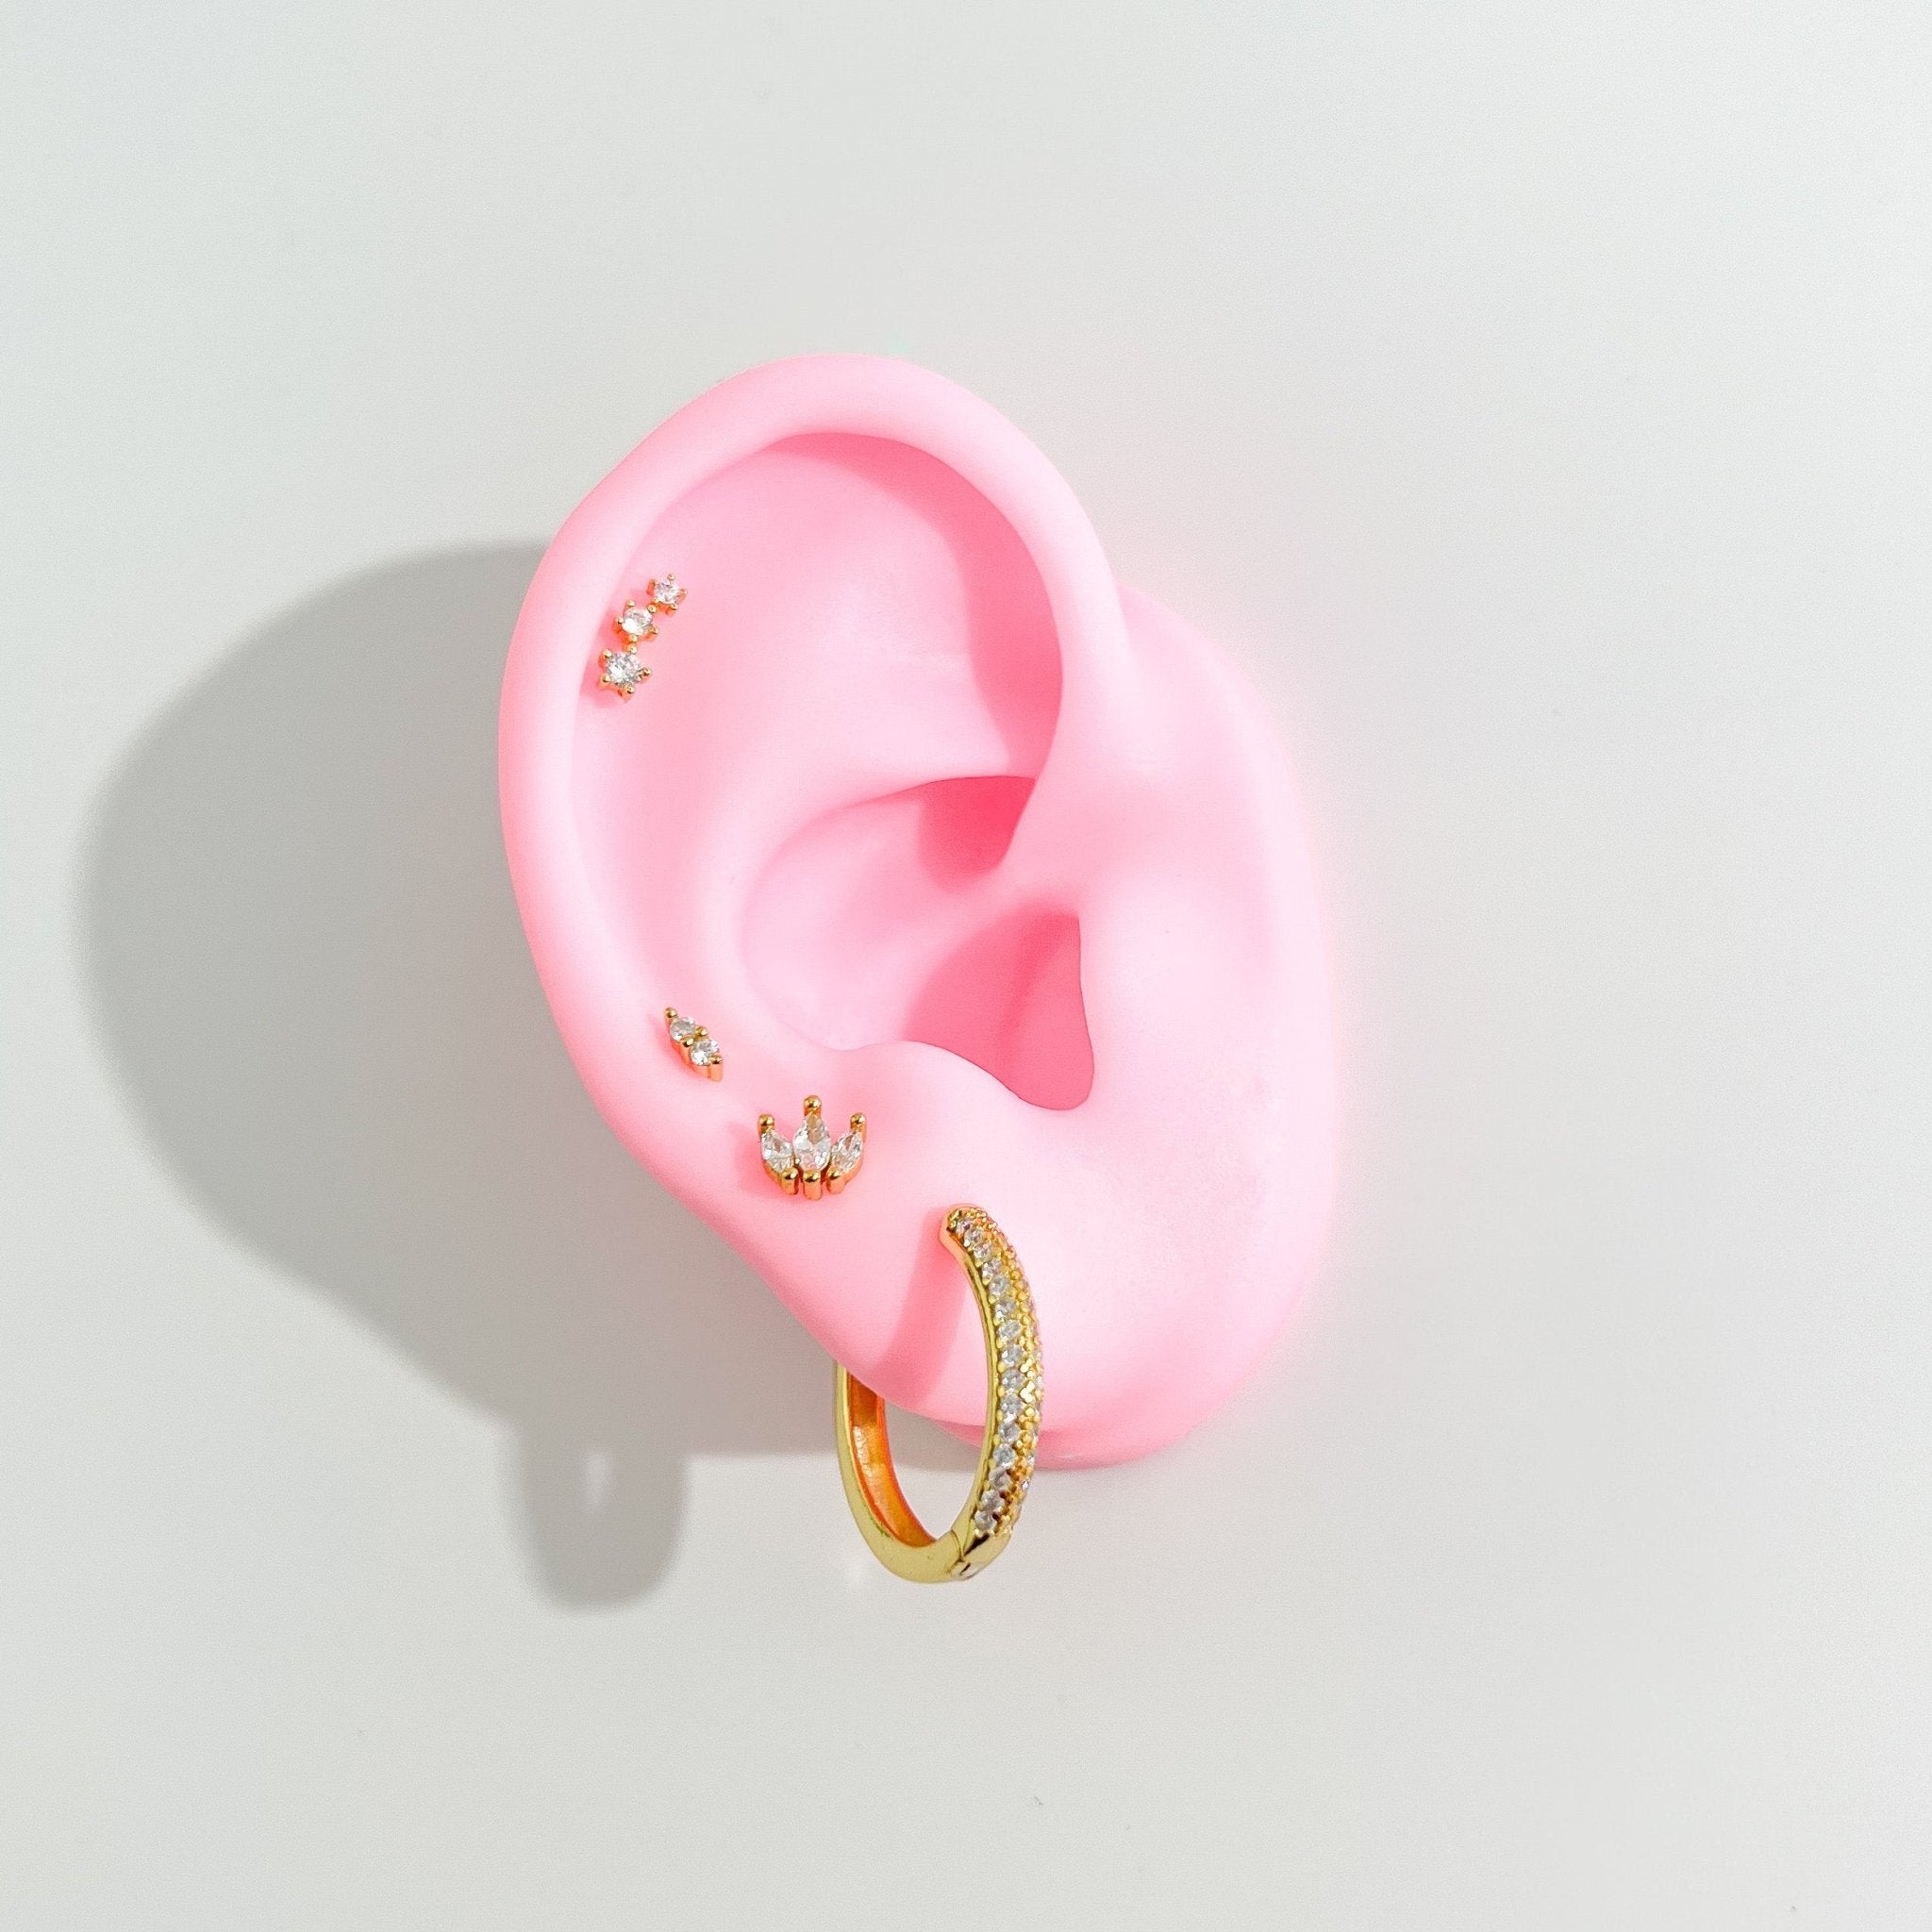 Mini Shimmer Threadless Flat Back Studs - Flaire & Co.